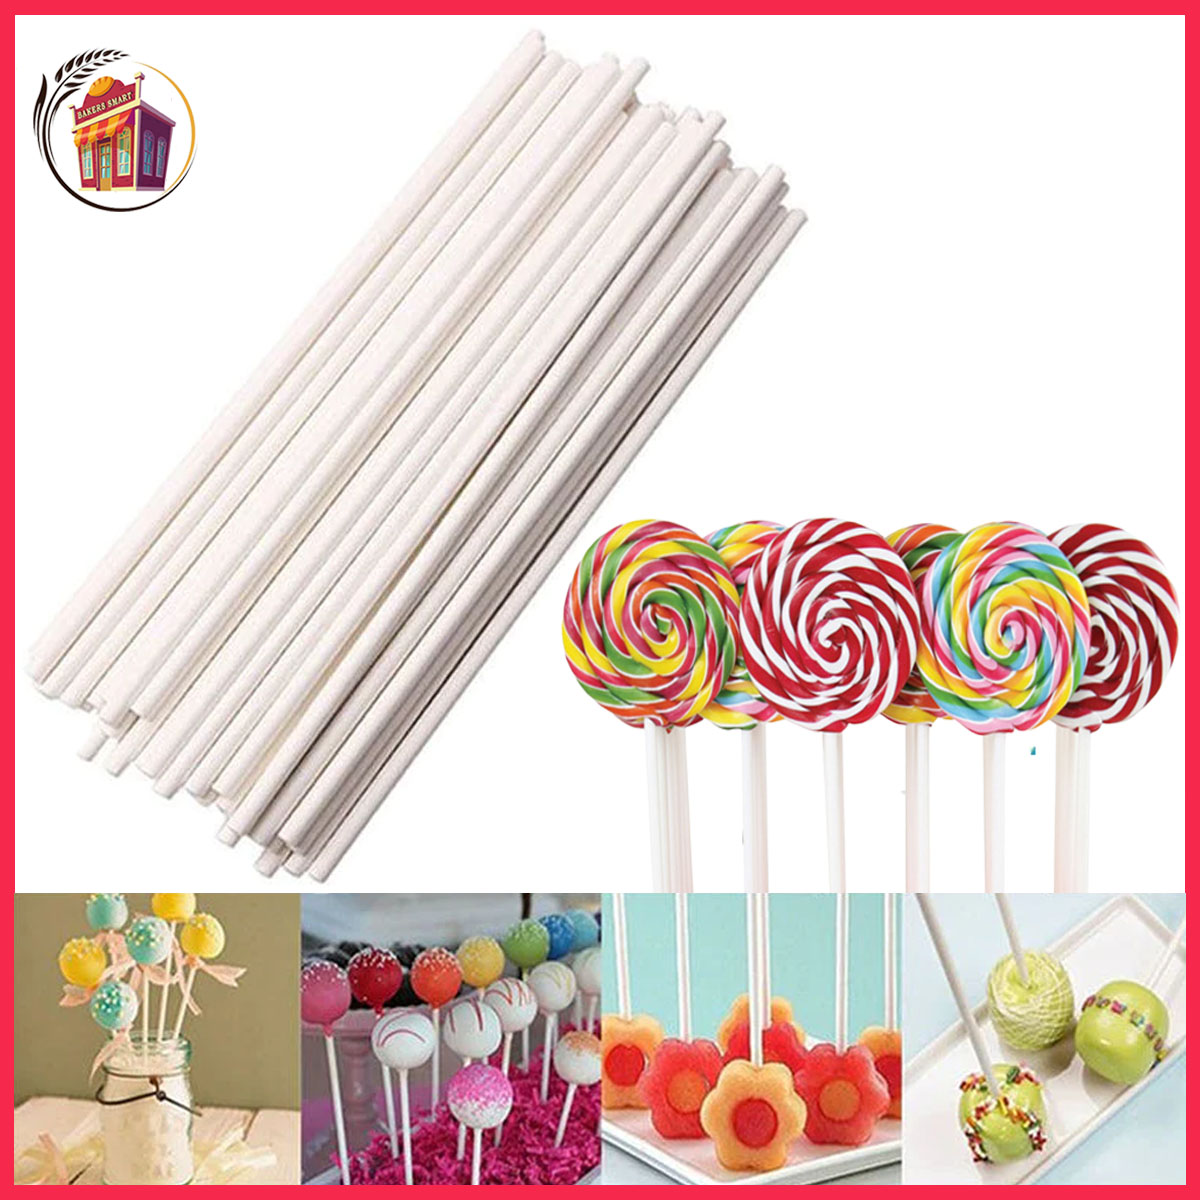 Sweetly Does It Pack of Fifty 10cm Cake Pop Sticks (Pack of 4